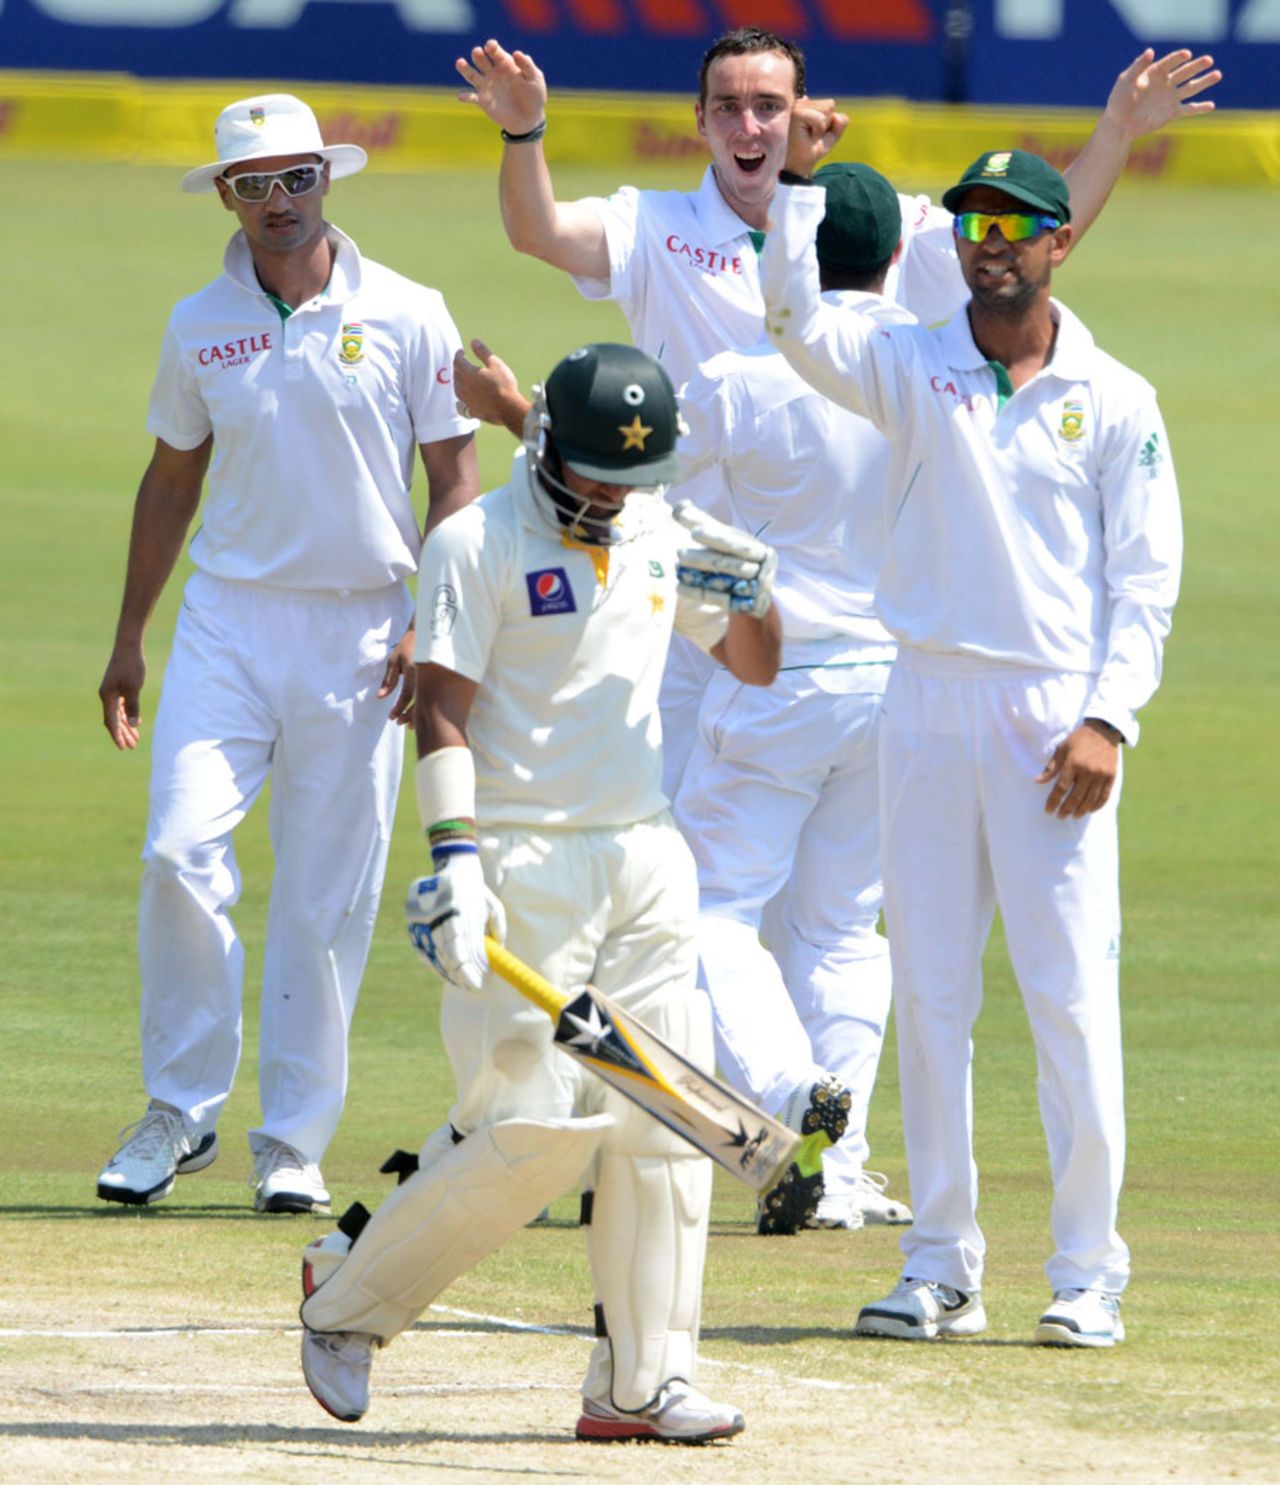 Imran Farhat walks back after being dismissed by Kyle Abbott, South Africa v Pakistan, 3rd Test, Centurion, 3rd day, February 24, 2013